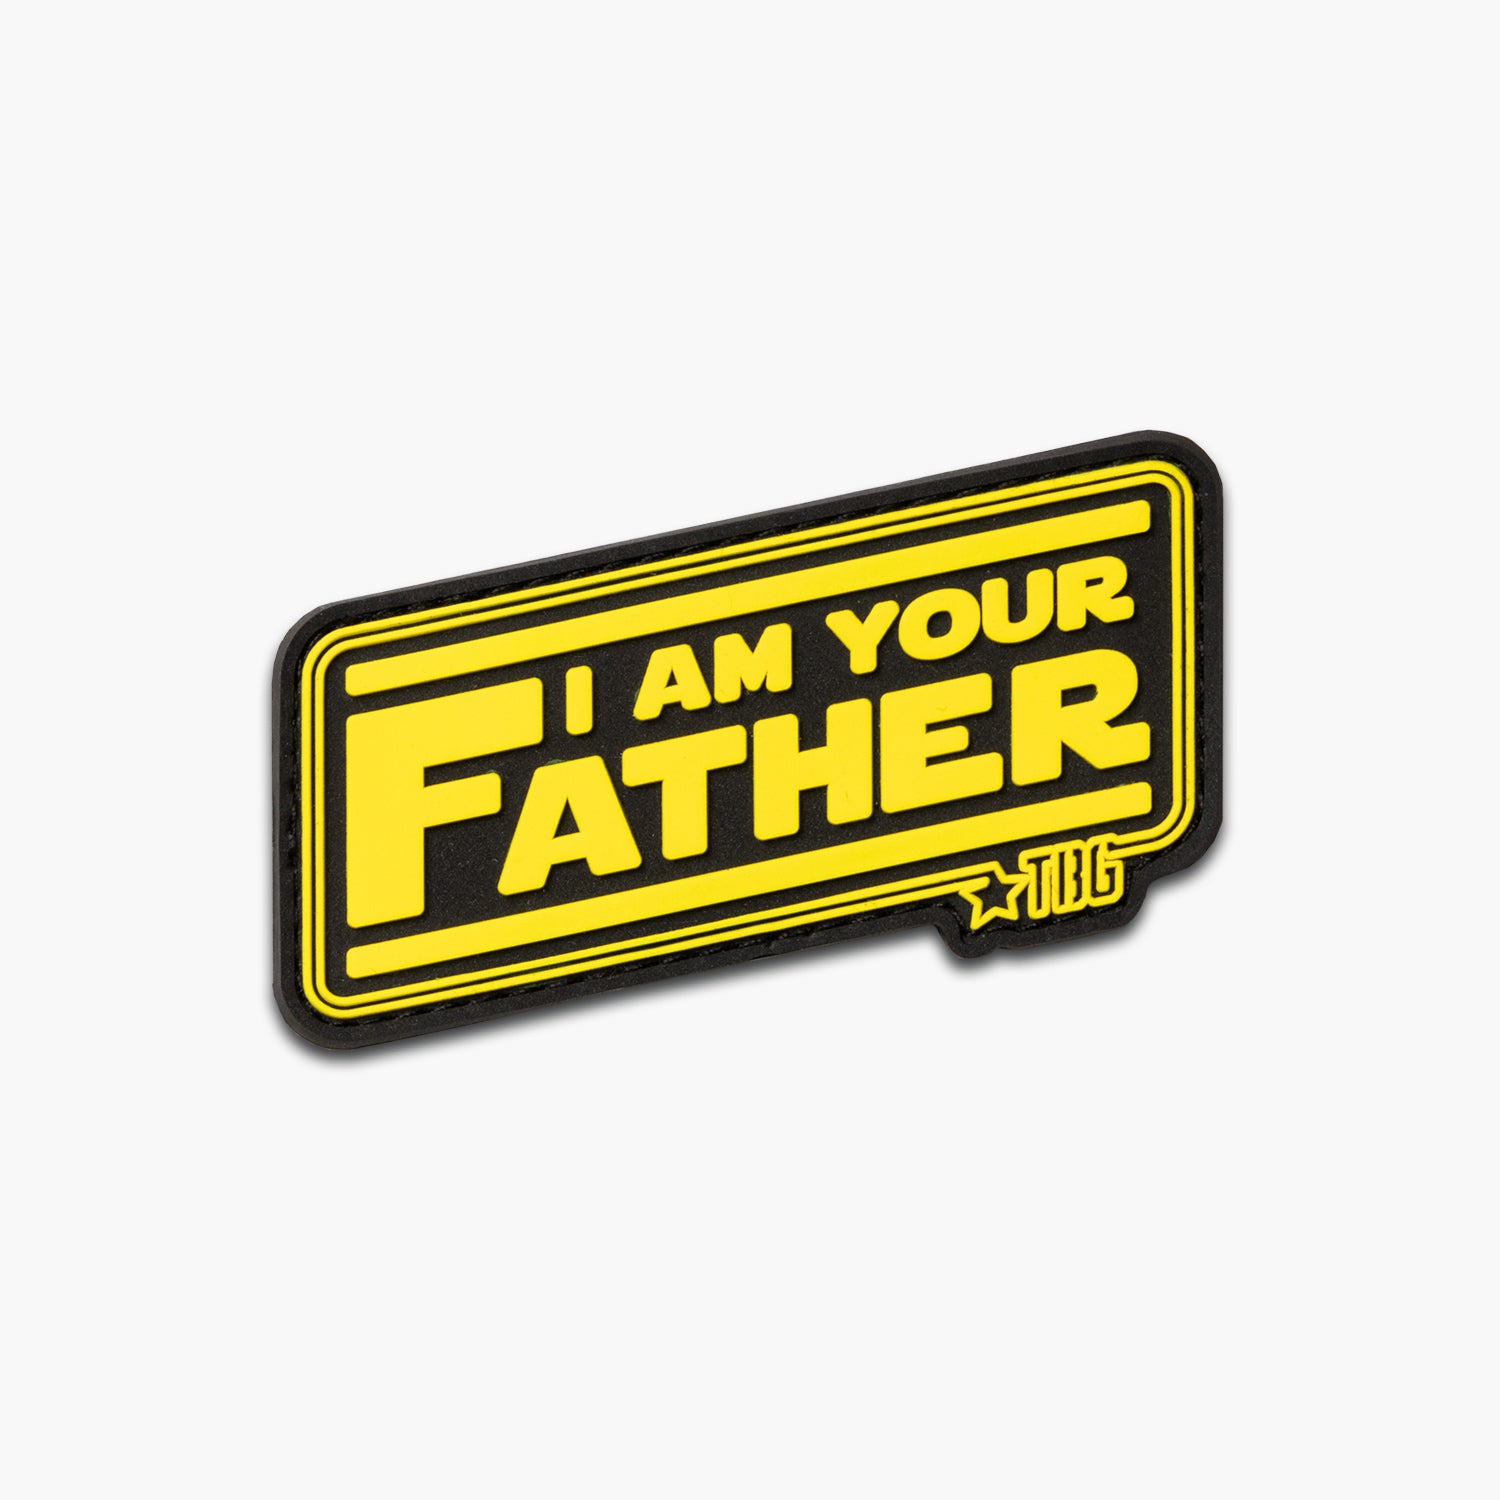 Star Wars Patches: 13 morale patches for your gear